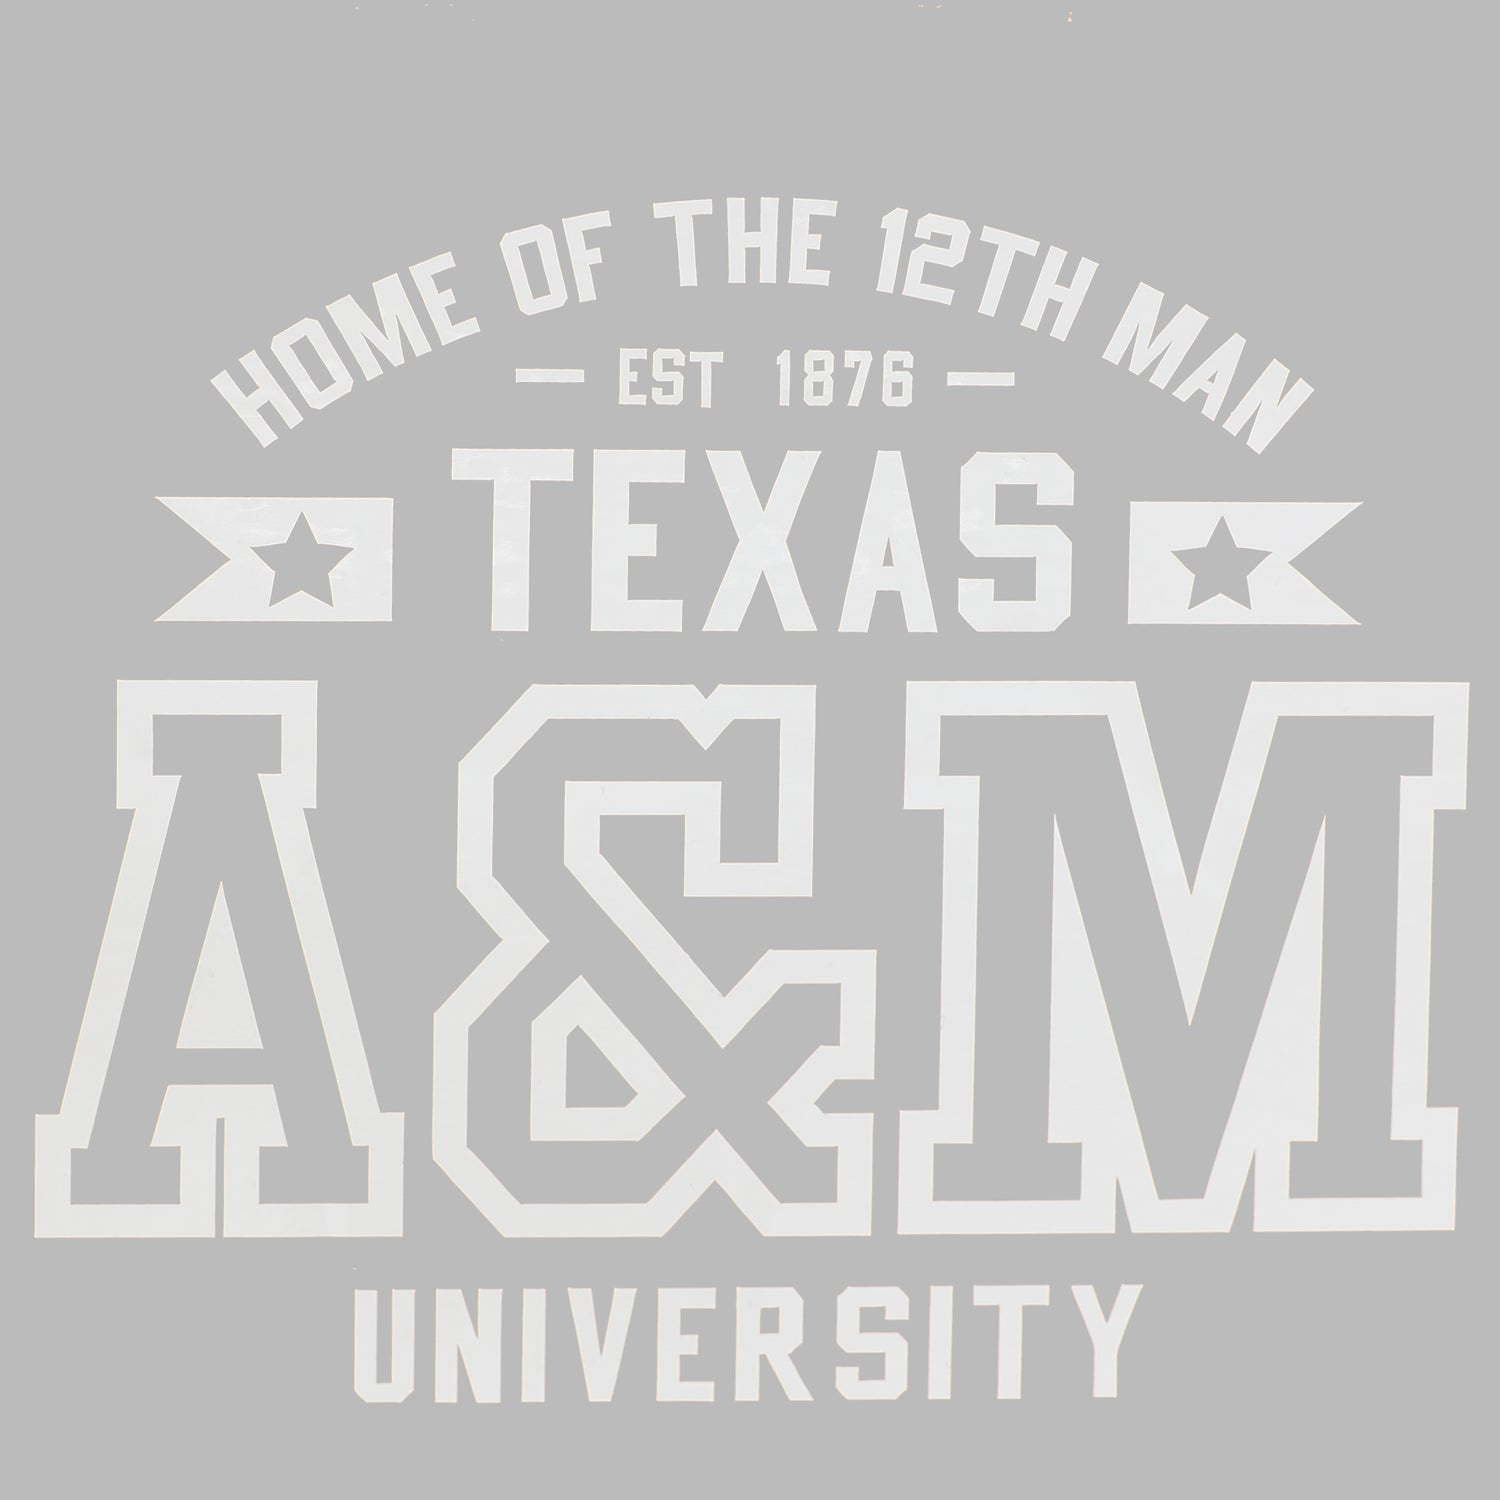 Texas A&M Home Of The 12th Man Decal